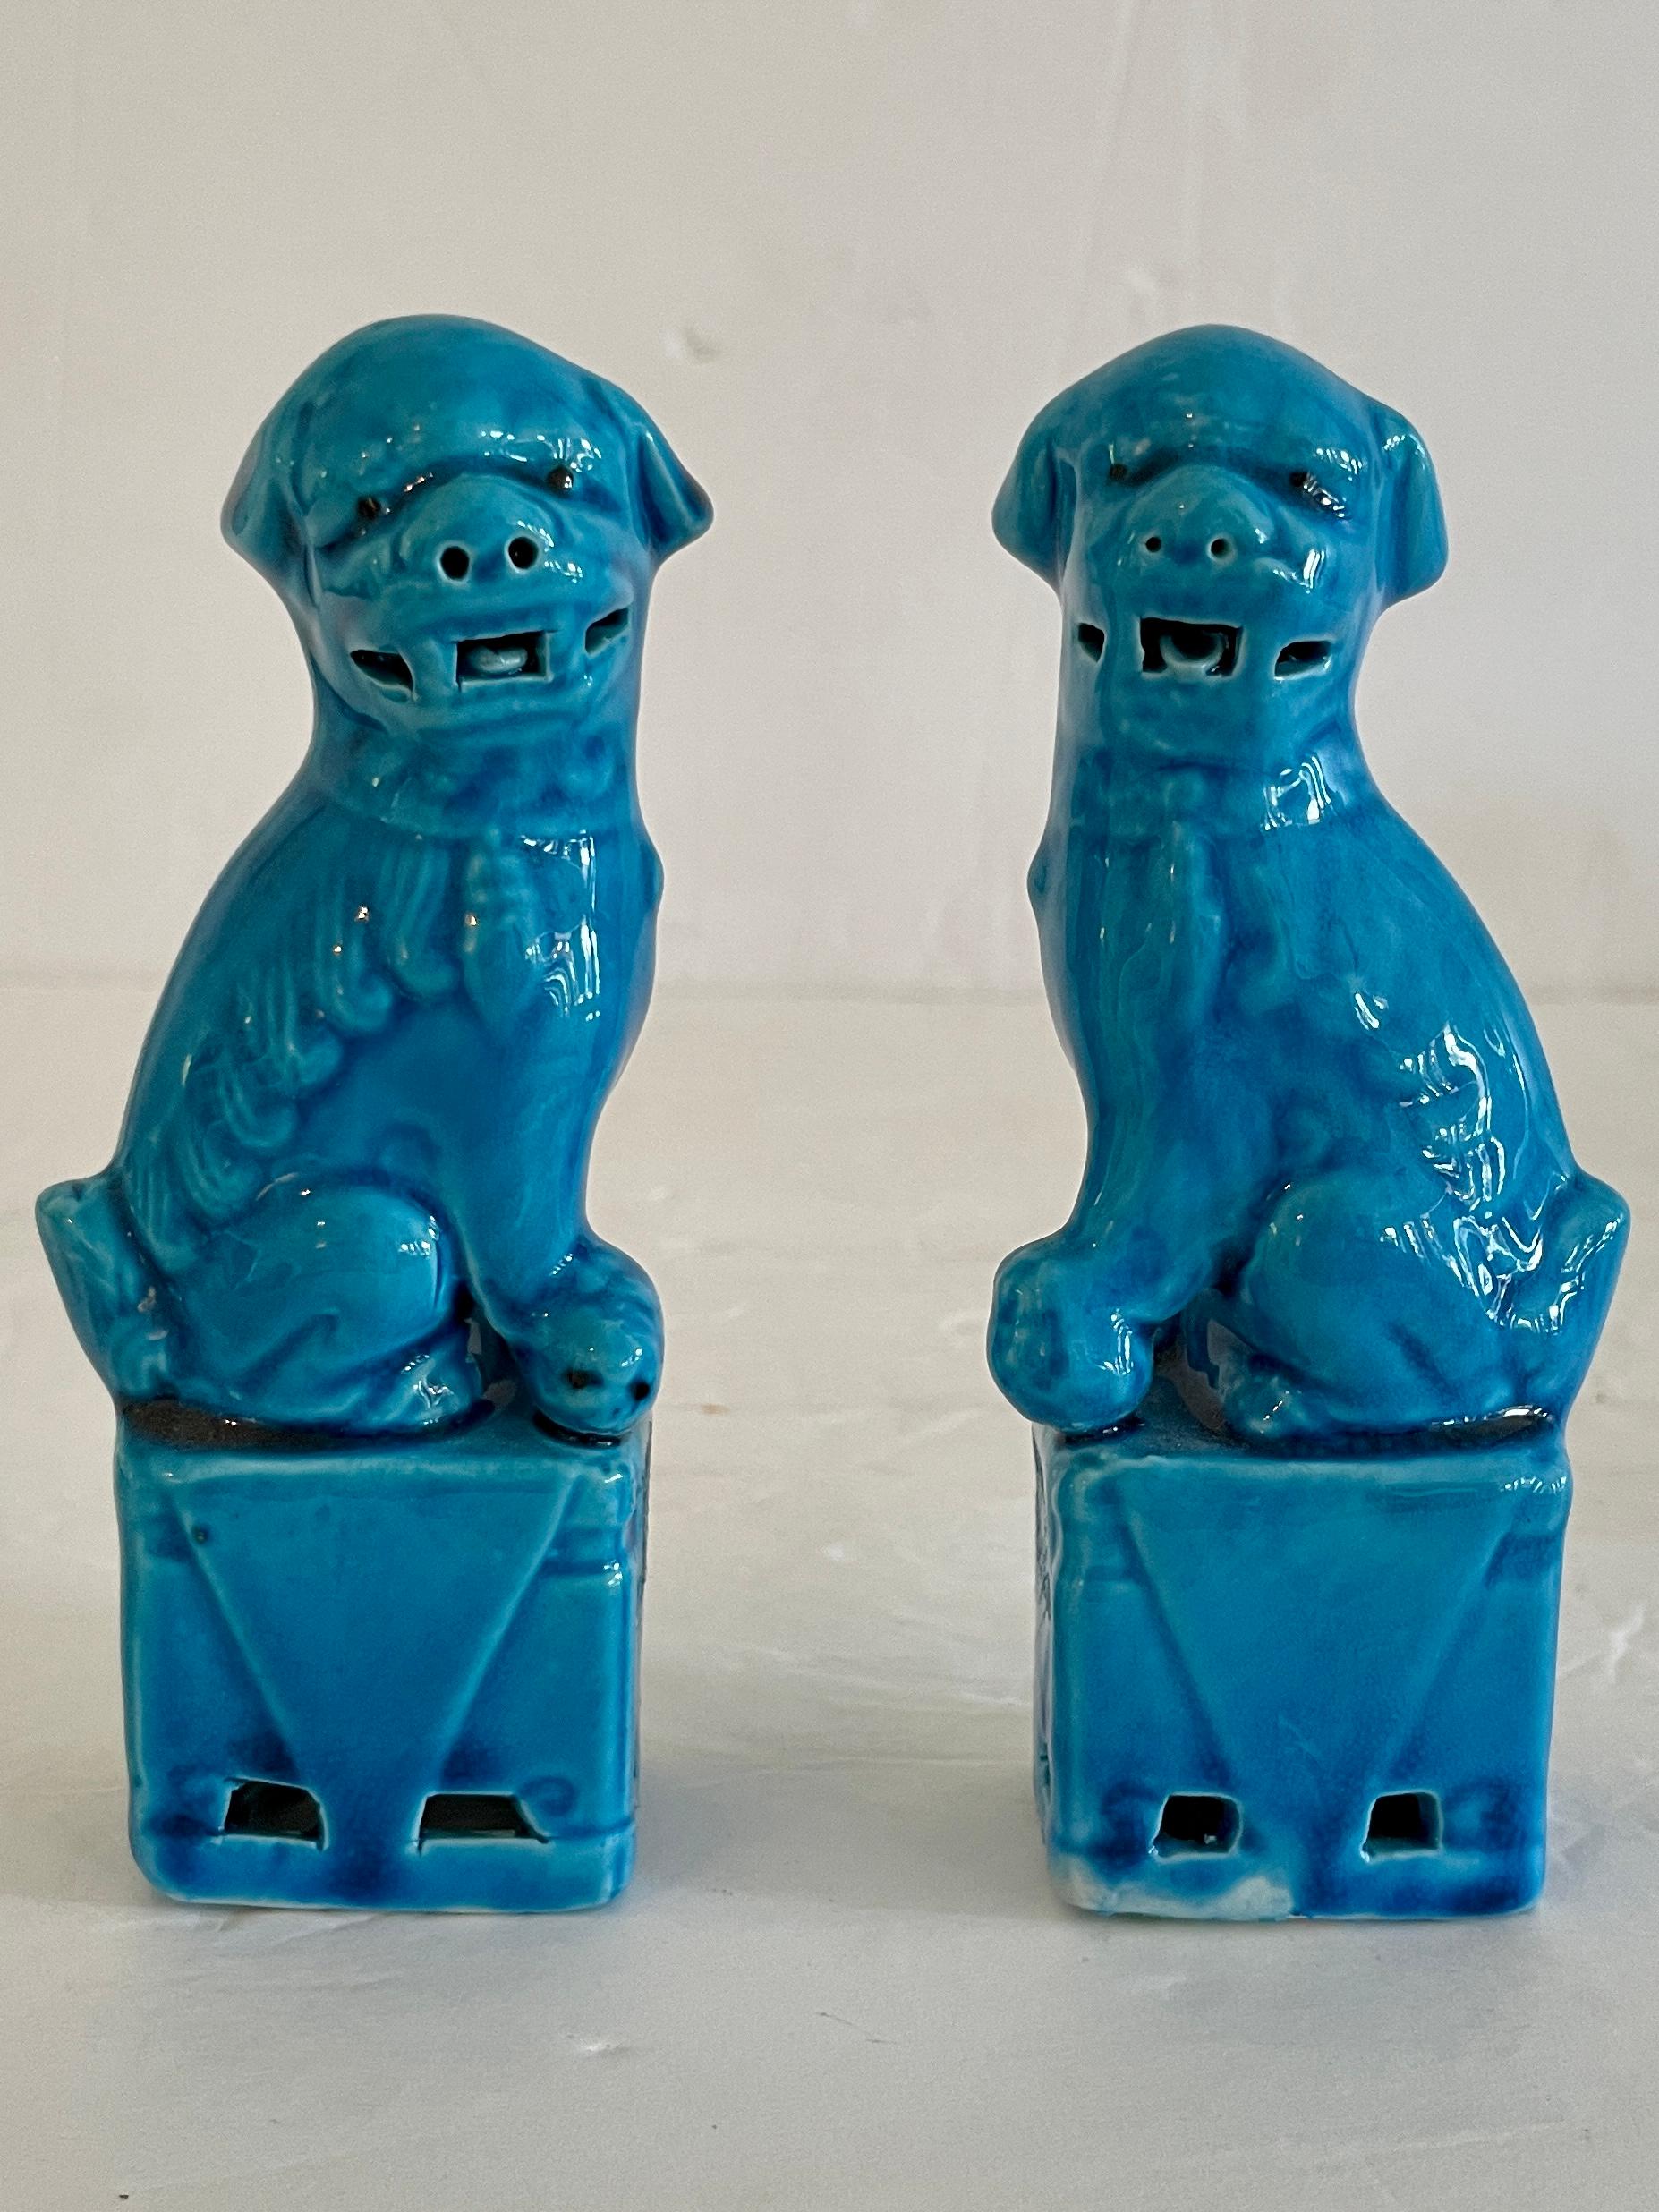 Fabulous pair of small Asian ceramic turquoise foo dogs with both male and female figures. The carving details are amazing. Great addition to your chinoiserie collection.